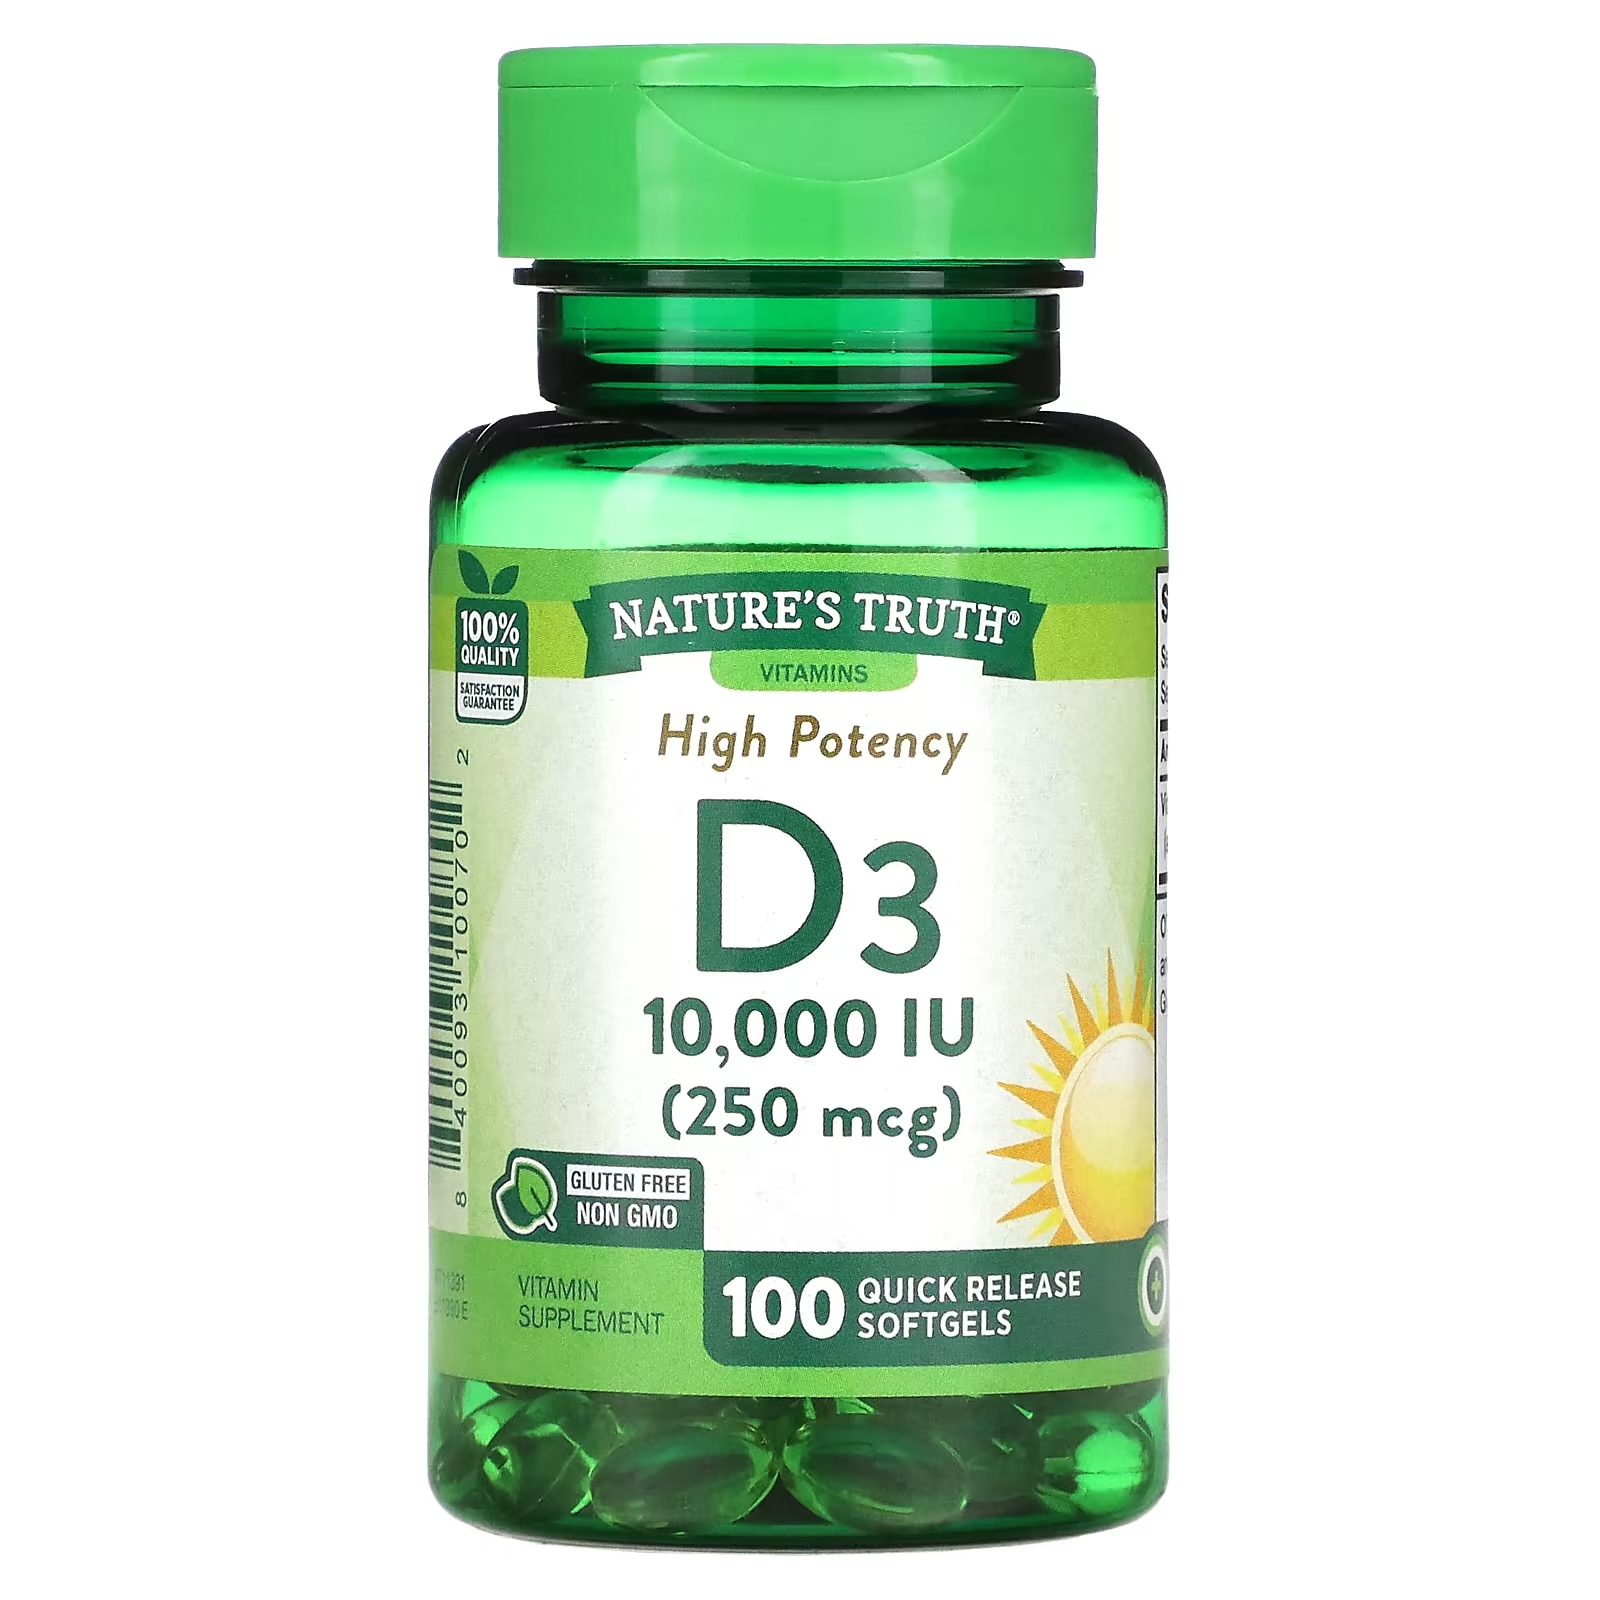 Nature's Truth Vitamin D3 High Potency 250 mcg 10,000 IU, 100 гелевых капсул